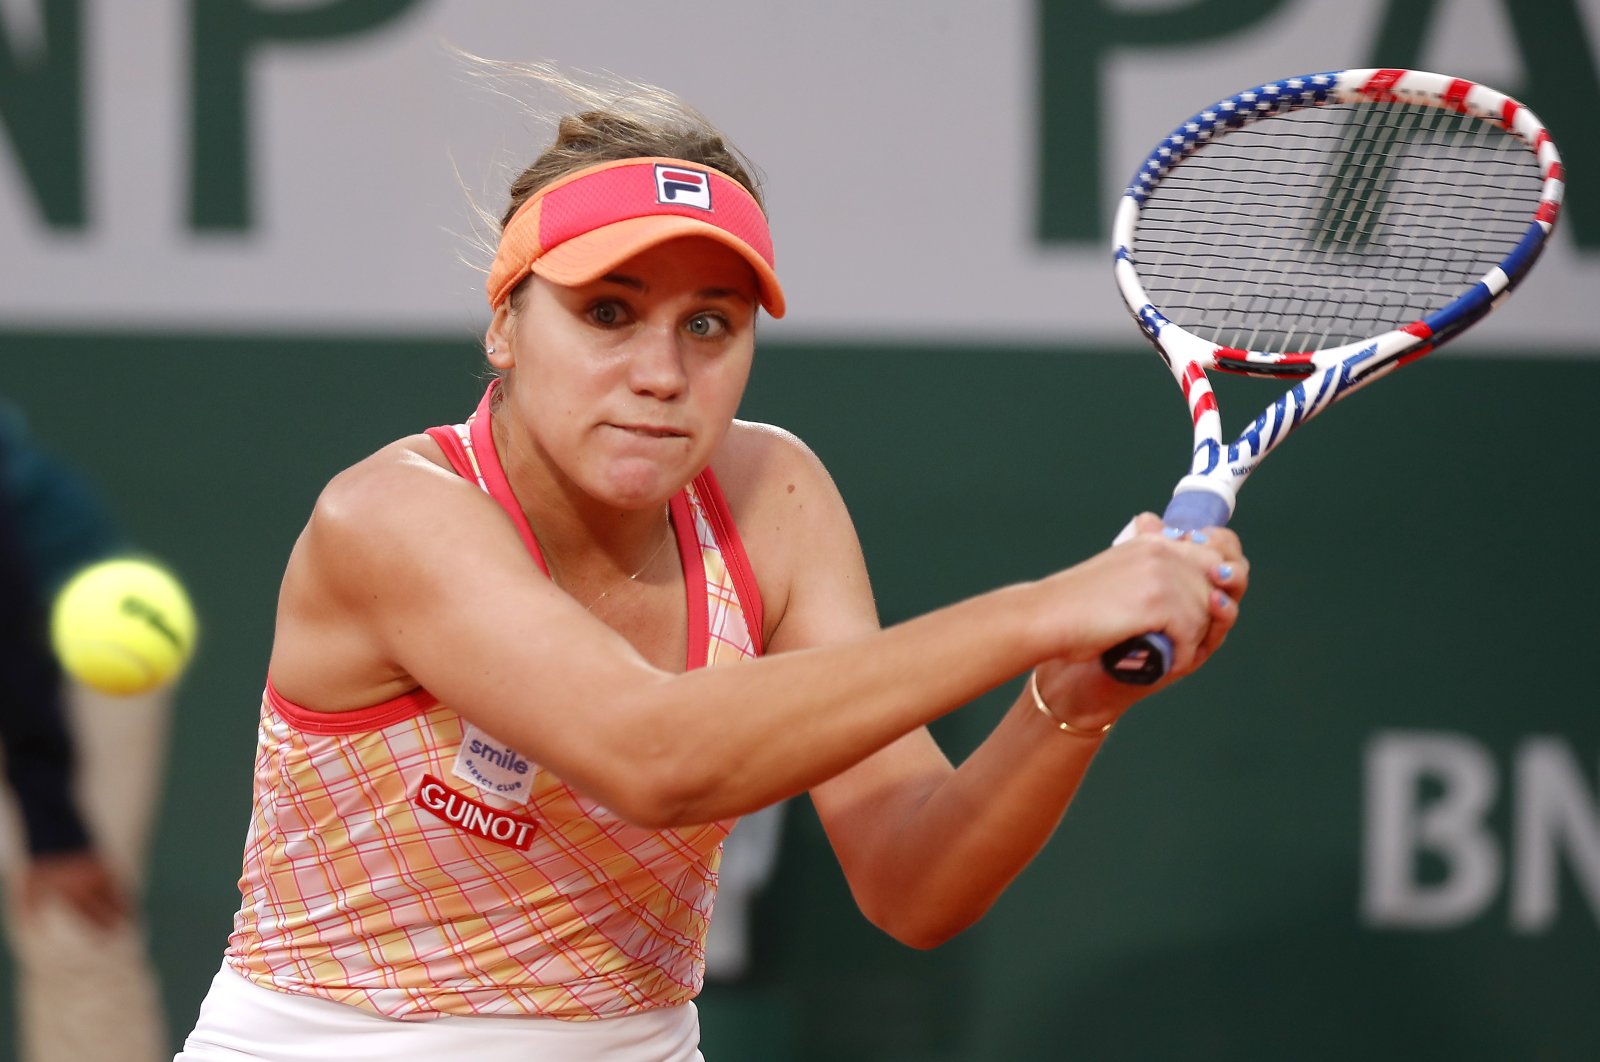 Sofia Kenin in action during the French Open semifinal match against Petra Kvitova, in Paris, France, Oct. 8, 2020. (Reuters Photo)
